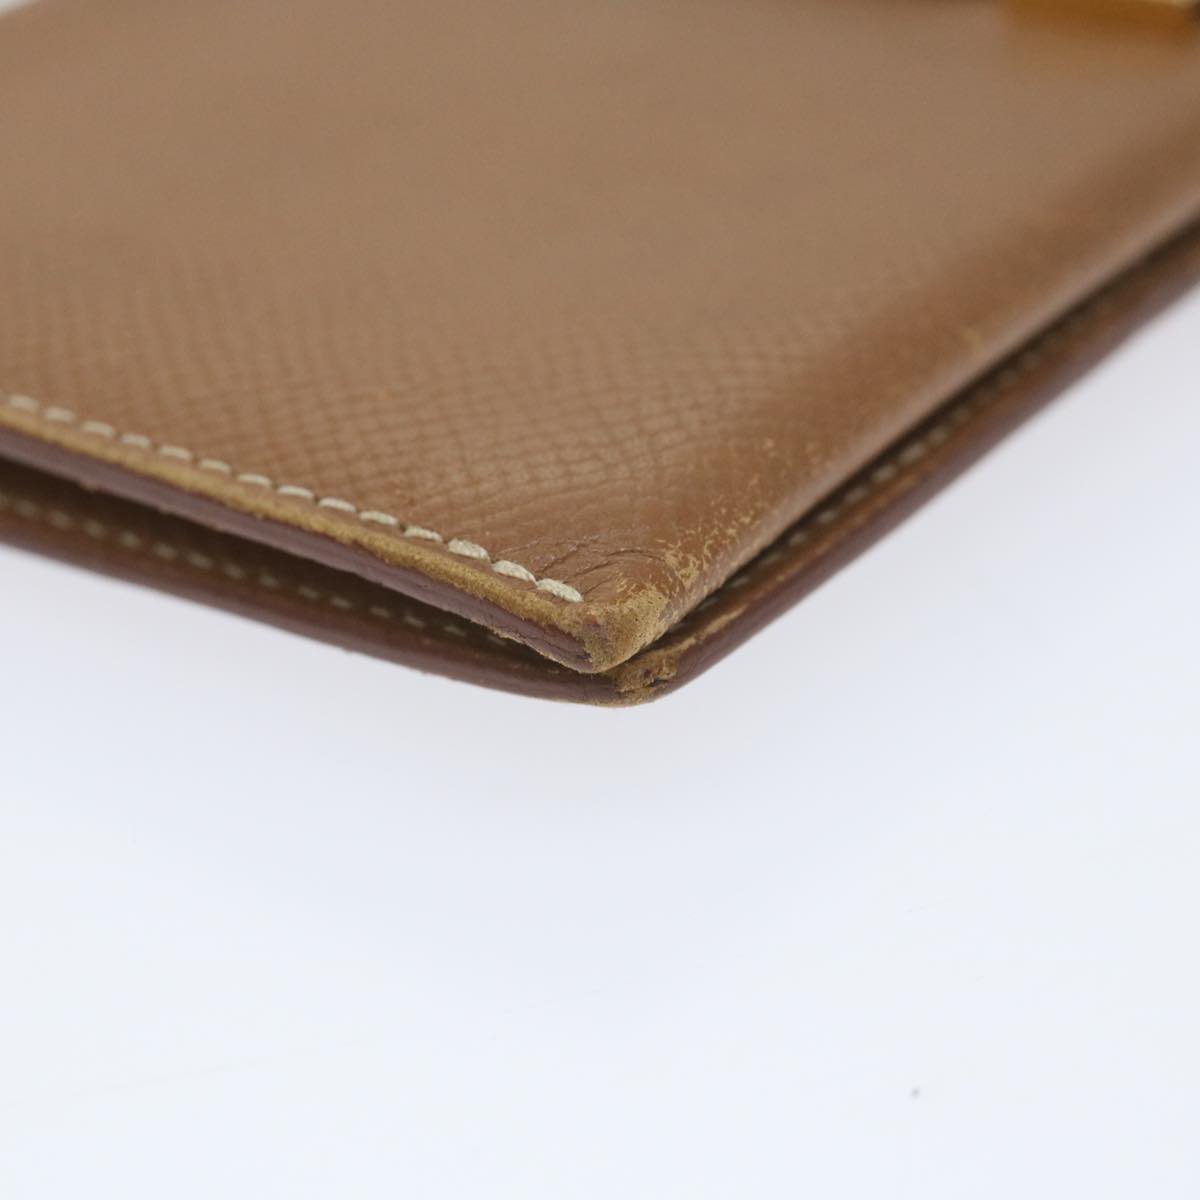 HERMES Bean Wallet Leather Brown Auth 56696